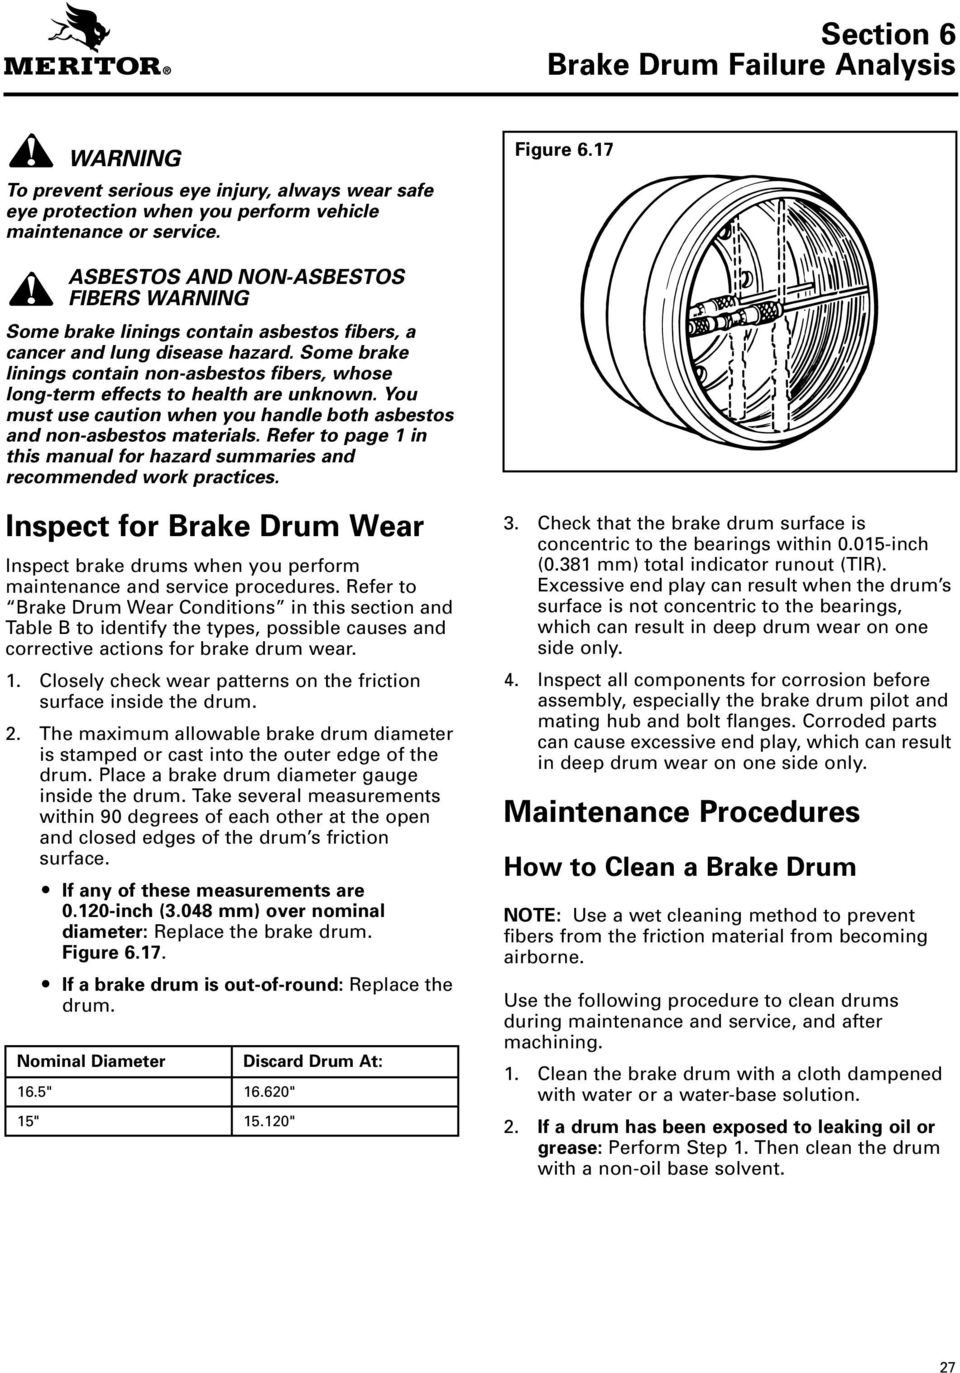 Some brake linings contain non-asbestos fibers, whose long-term effects to health are unknown. You must use caution when you handle both asbestos and non-asbestos materials.